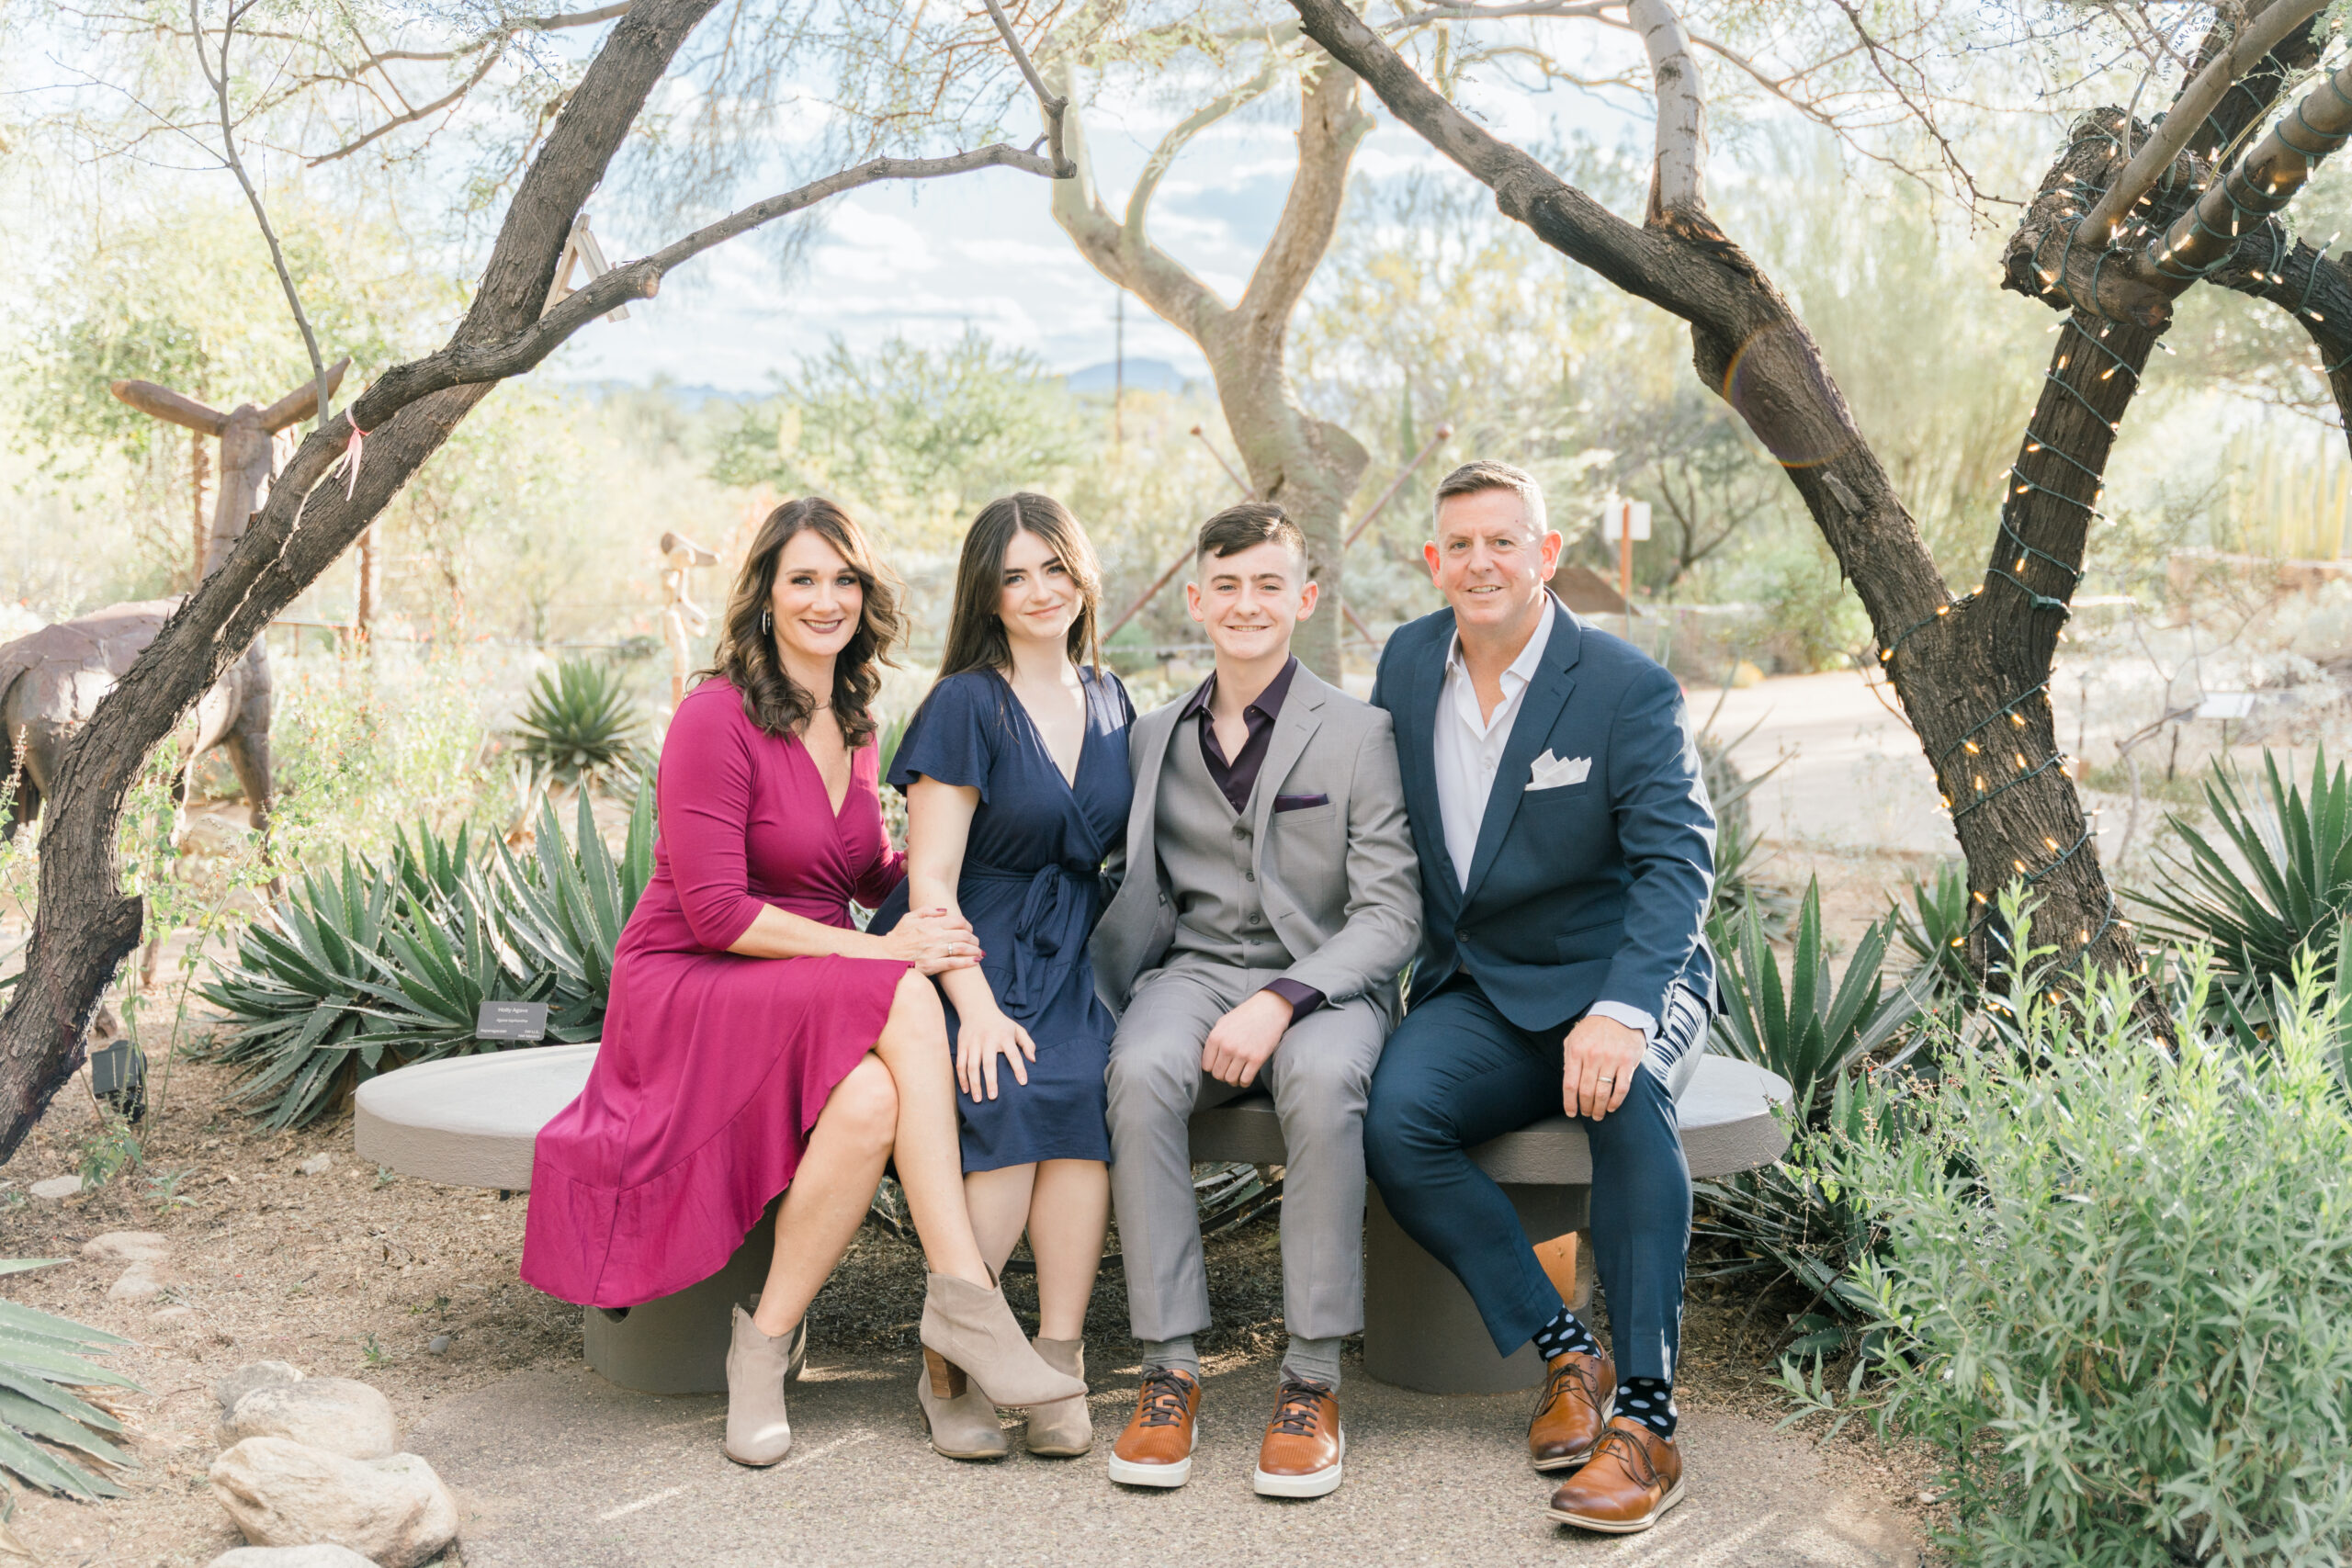 Family Photography Session at Tohono Chul Botanical Gardens. Parents and Teens pose together on a bench. Ruby Sandoval Photography.